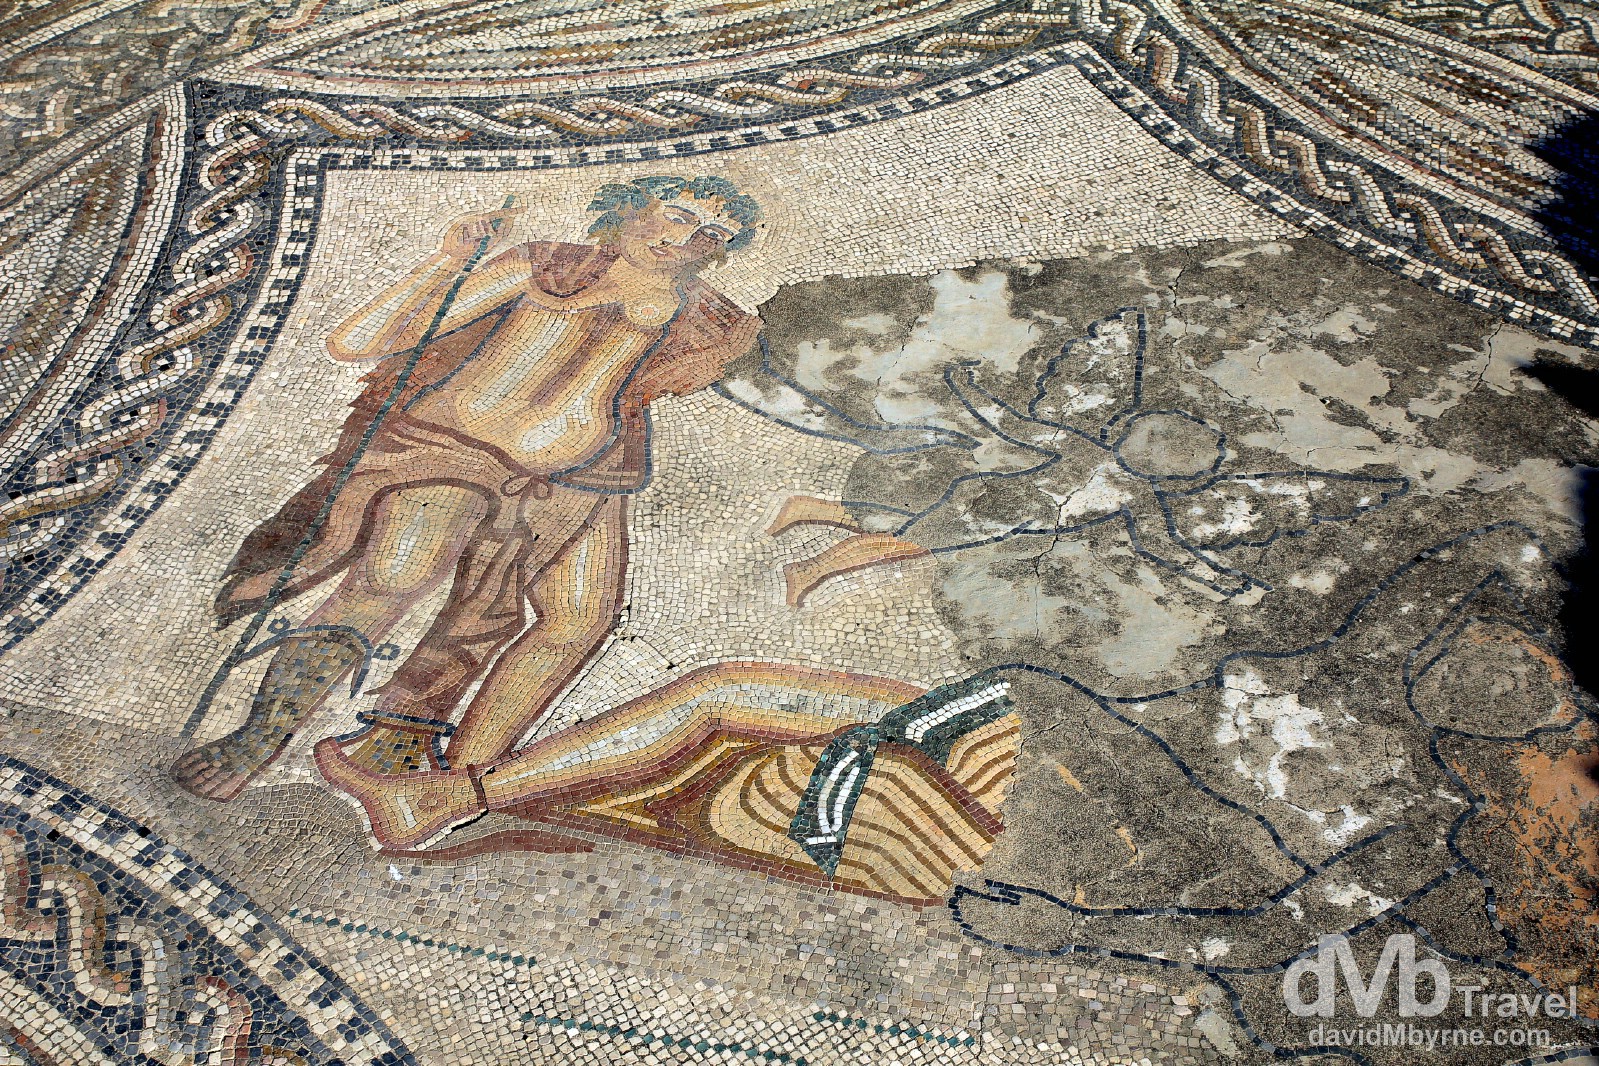 The mosaic Dionysos Discovering Ariadne in the Knight’s House at the UNESCO-listed Roman site of Volubilis, northern Morocco. May 25th, 2014.